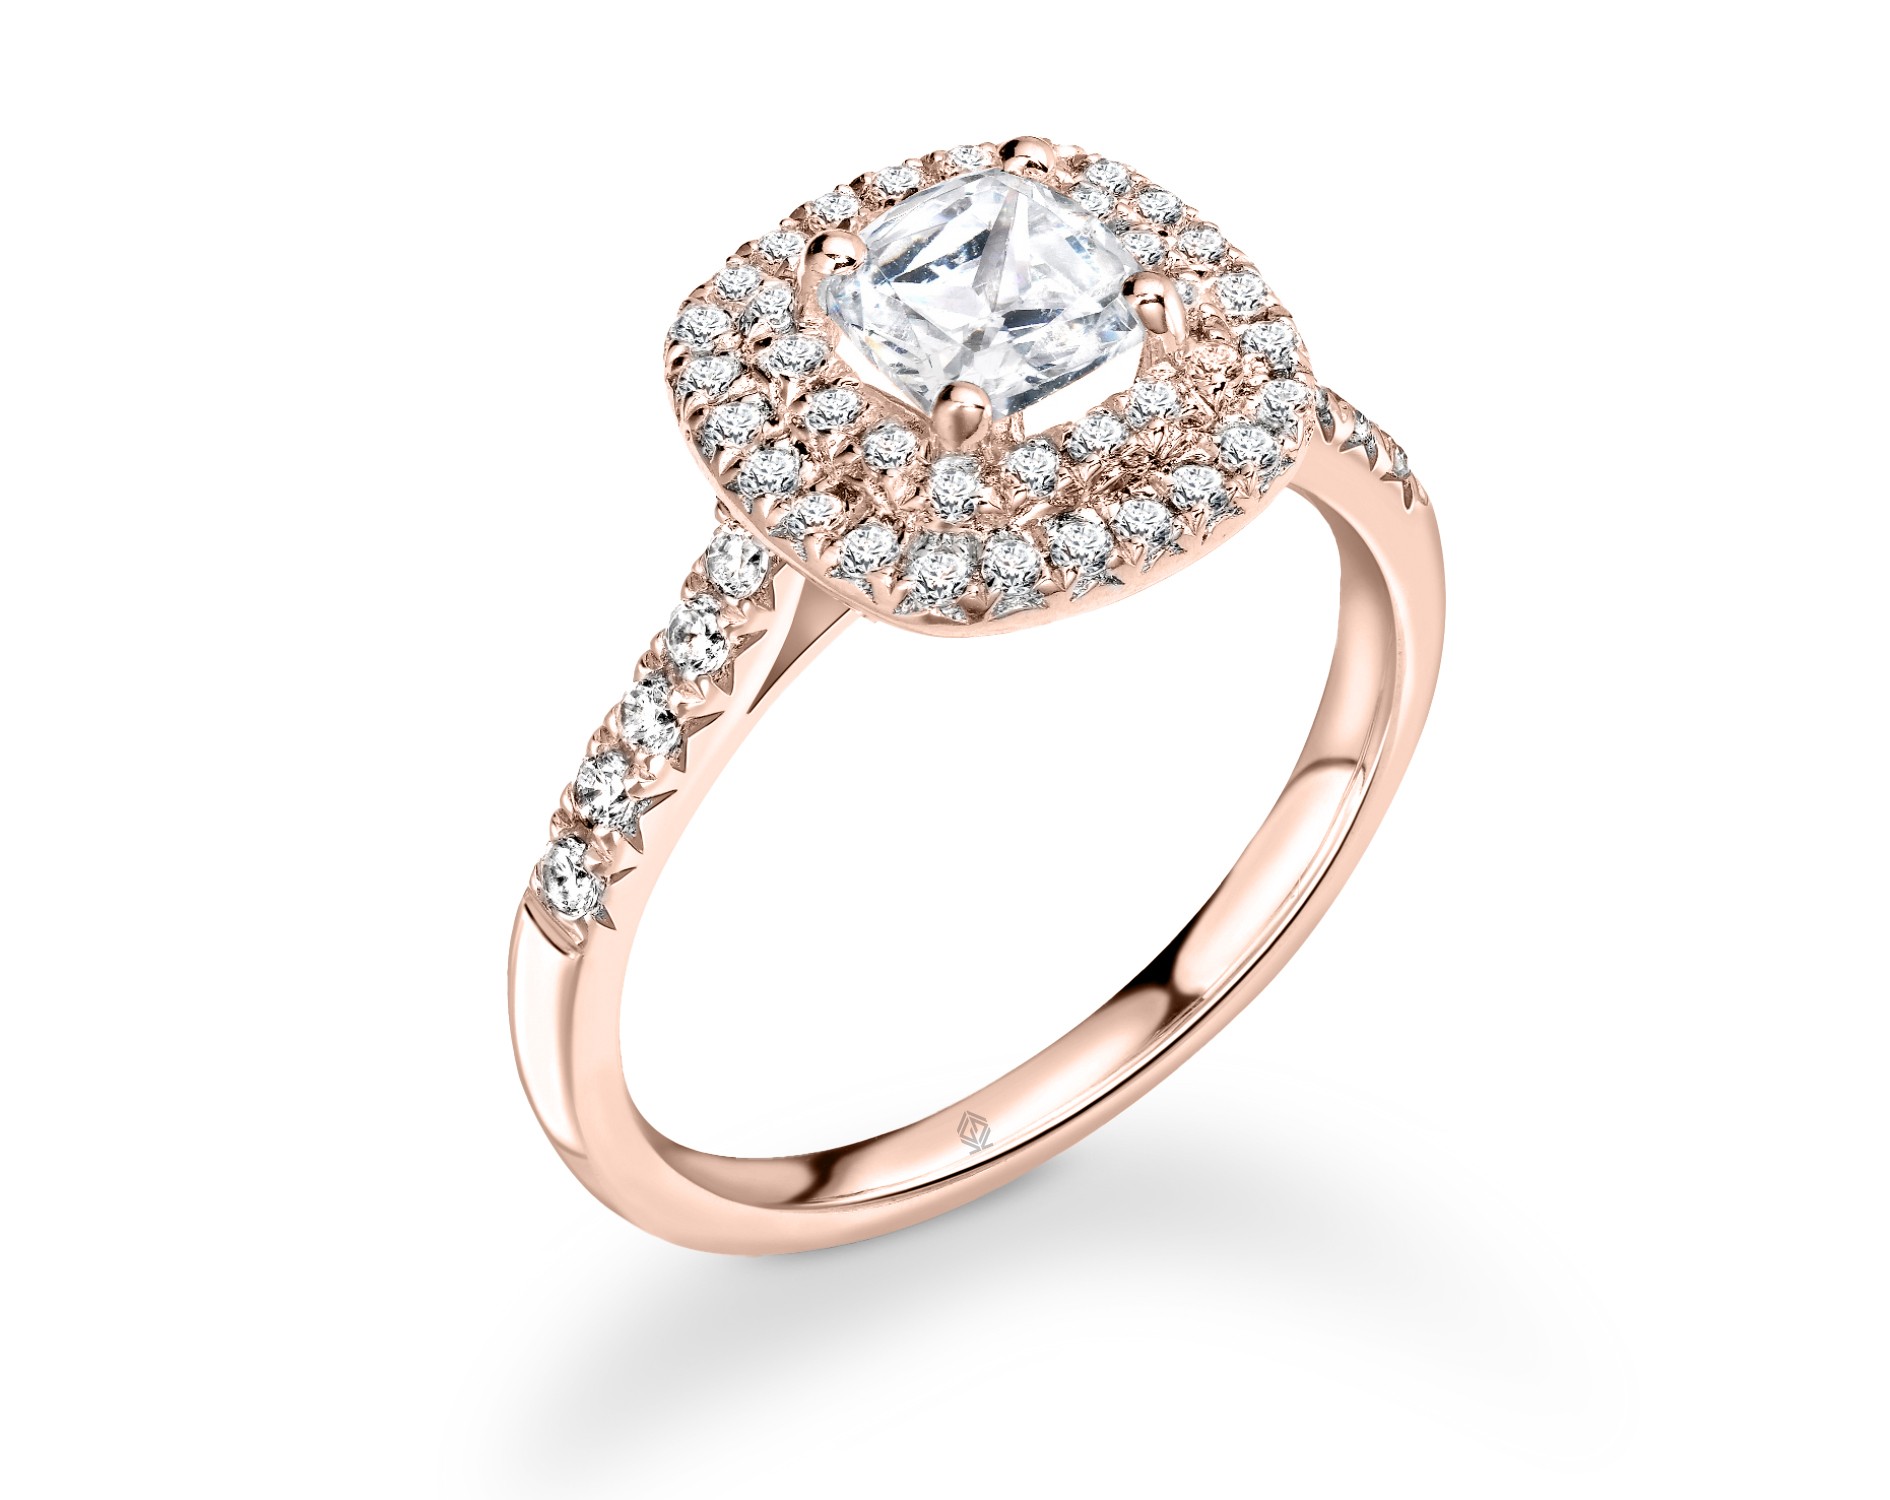 18K ROSE GOLD DOUBLE HALO CUSHION CUT DIAMOND ENGAGEMENT RING WITH SIDE STONES PAVE SET